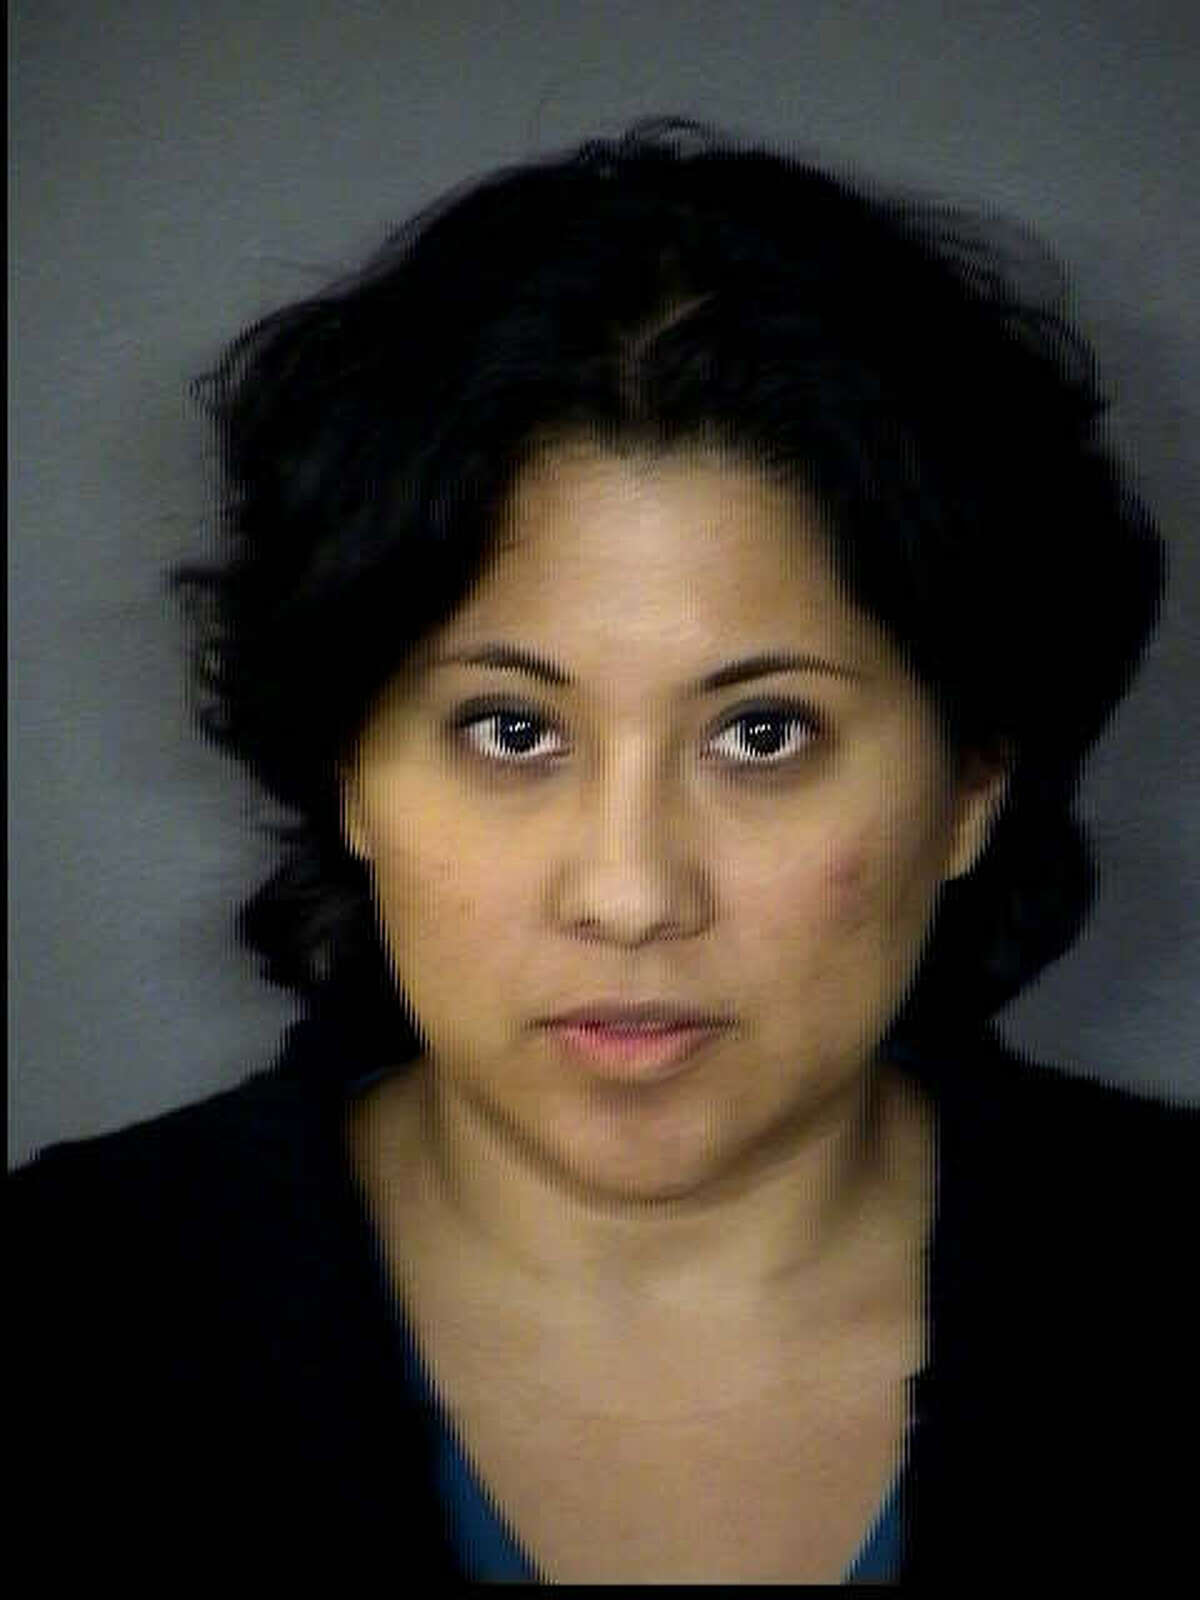 The judge ordered Christine Caldera, 39, to be treated at the state mental hospital.